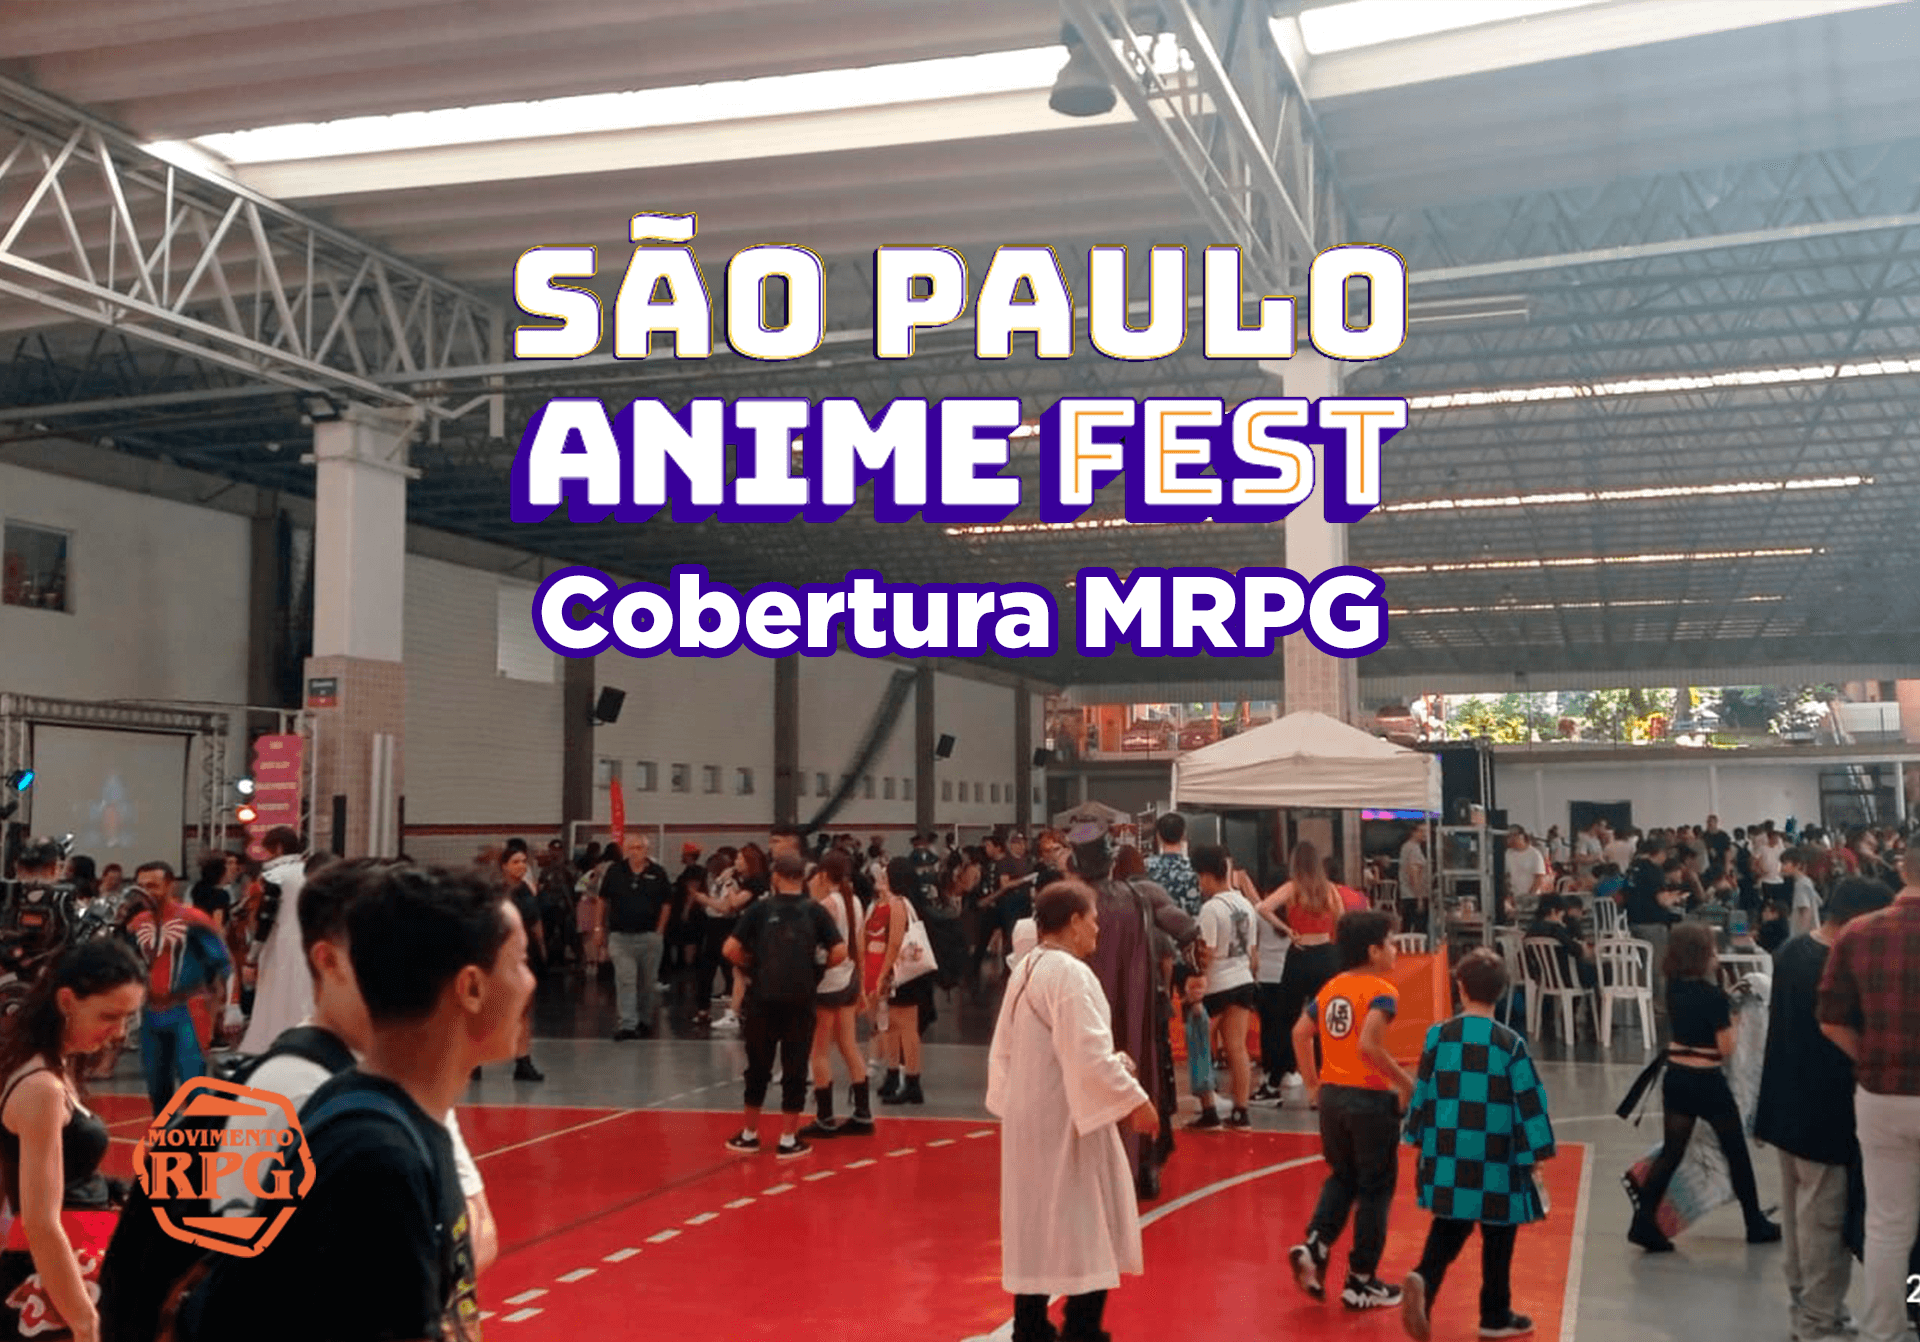 SUGOI! An Anime Fest just for you 😉... - Robinsons Galleria | Facebook-demhanvico.com.vn